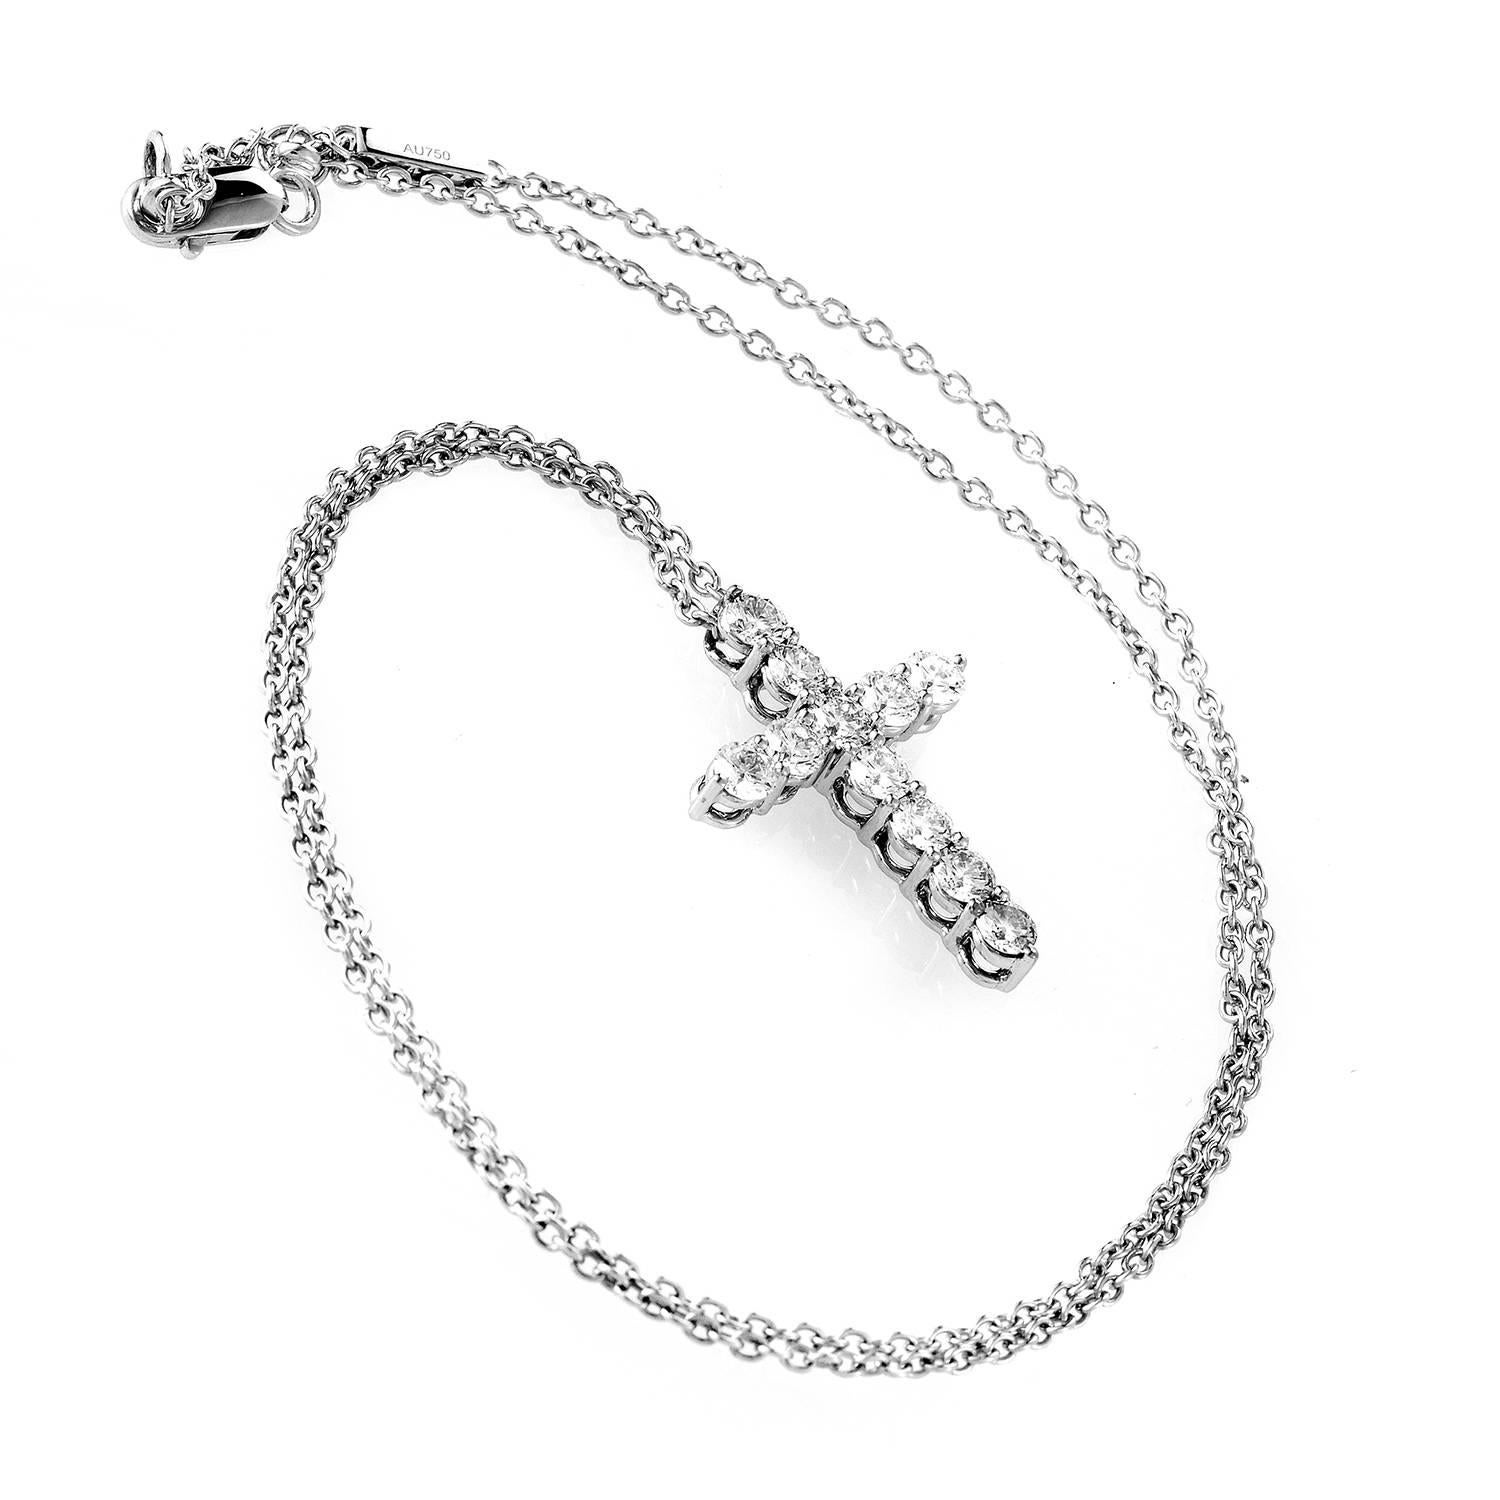 A symbol of grace cast with luxurious style. This cross pendant necklace from Graff bursts with 1.75ct diamonds. Their pronounced settings ripple through a meticulously crafted junction of 18K White Gold. The pendant measures one inch, and is